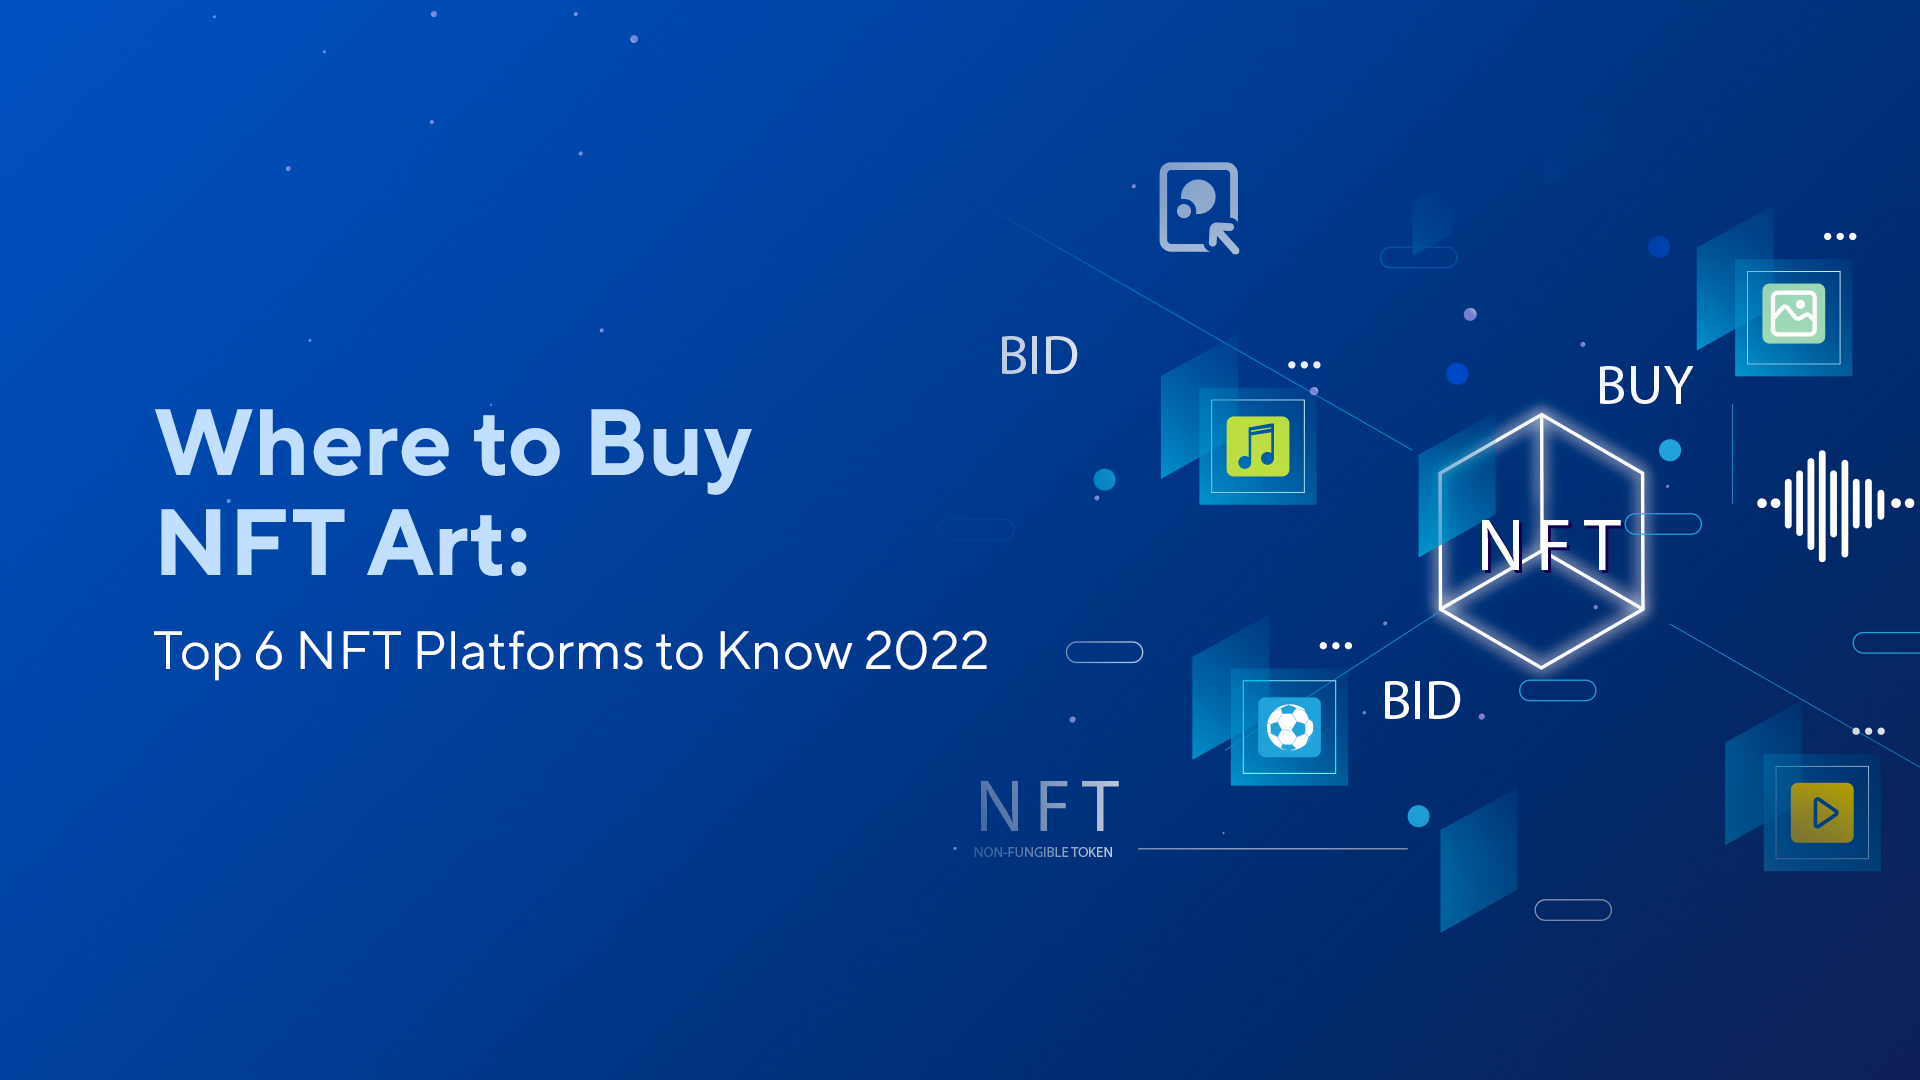 Where to Buy NFT Art: Top 6 NFT Platforms to Know 2022